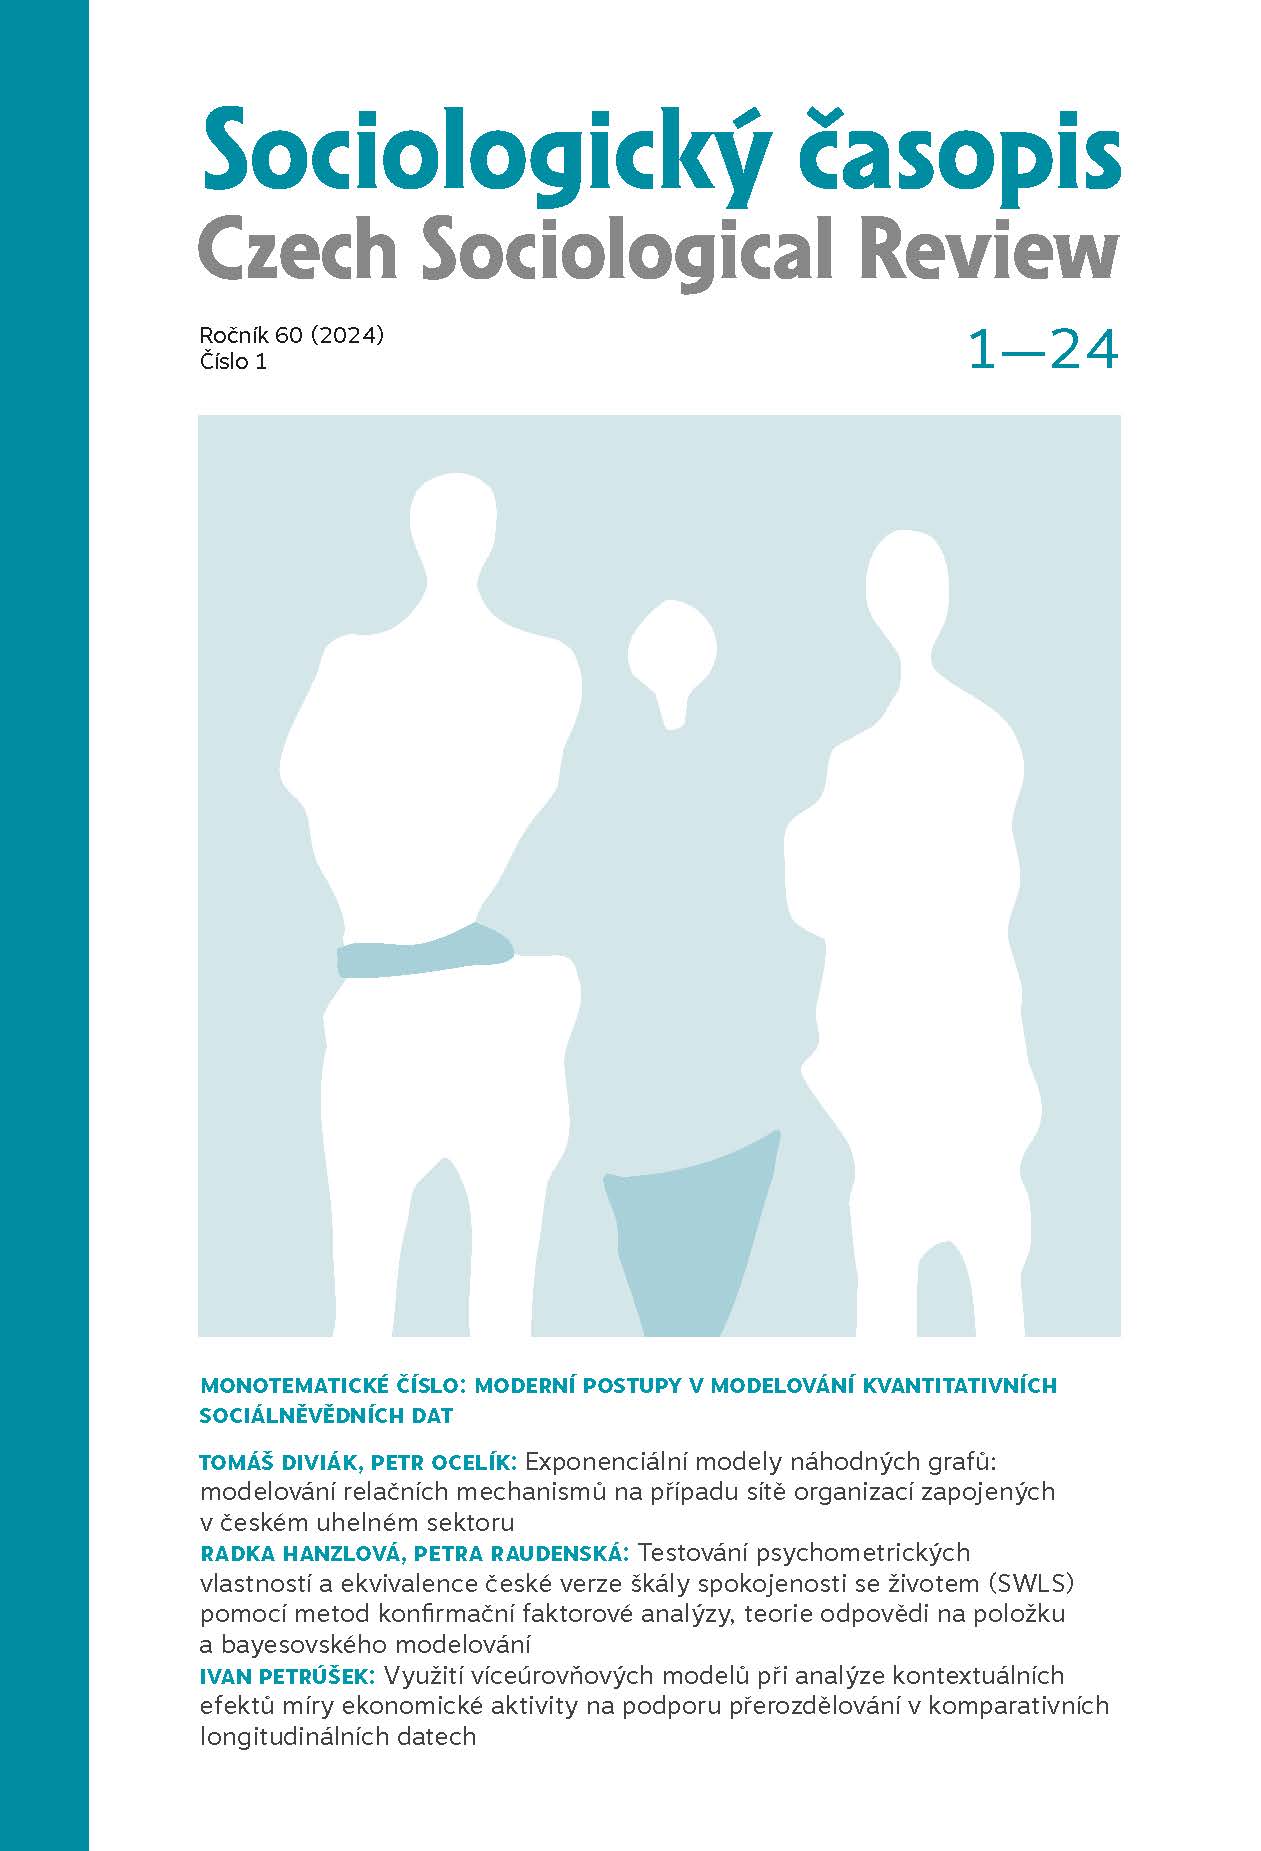 The Use of Multilevel Models in Analysing Contextual Effects of Labour Force Participation Rate on Redistribution Support with Comparative Longitudinal Survey Data Cover Image